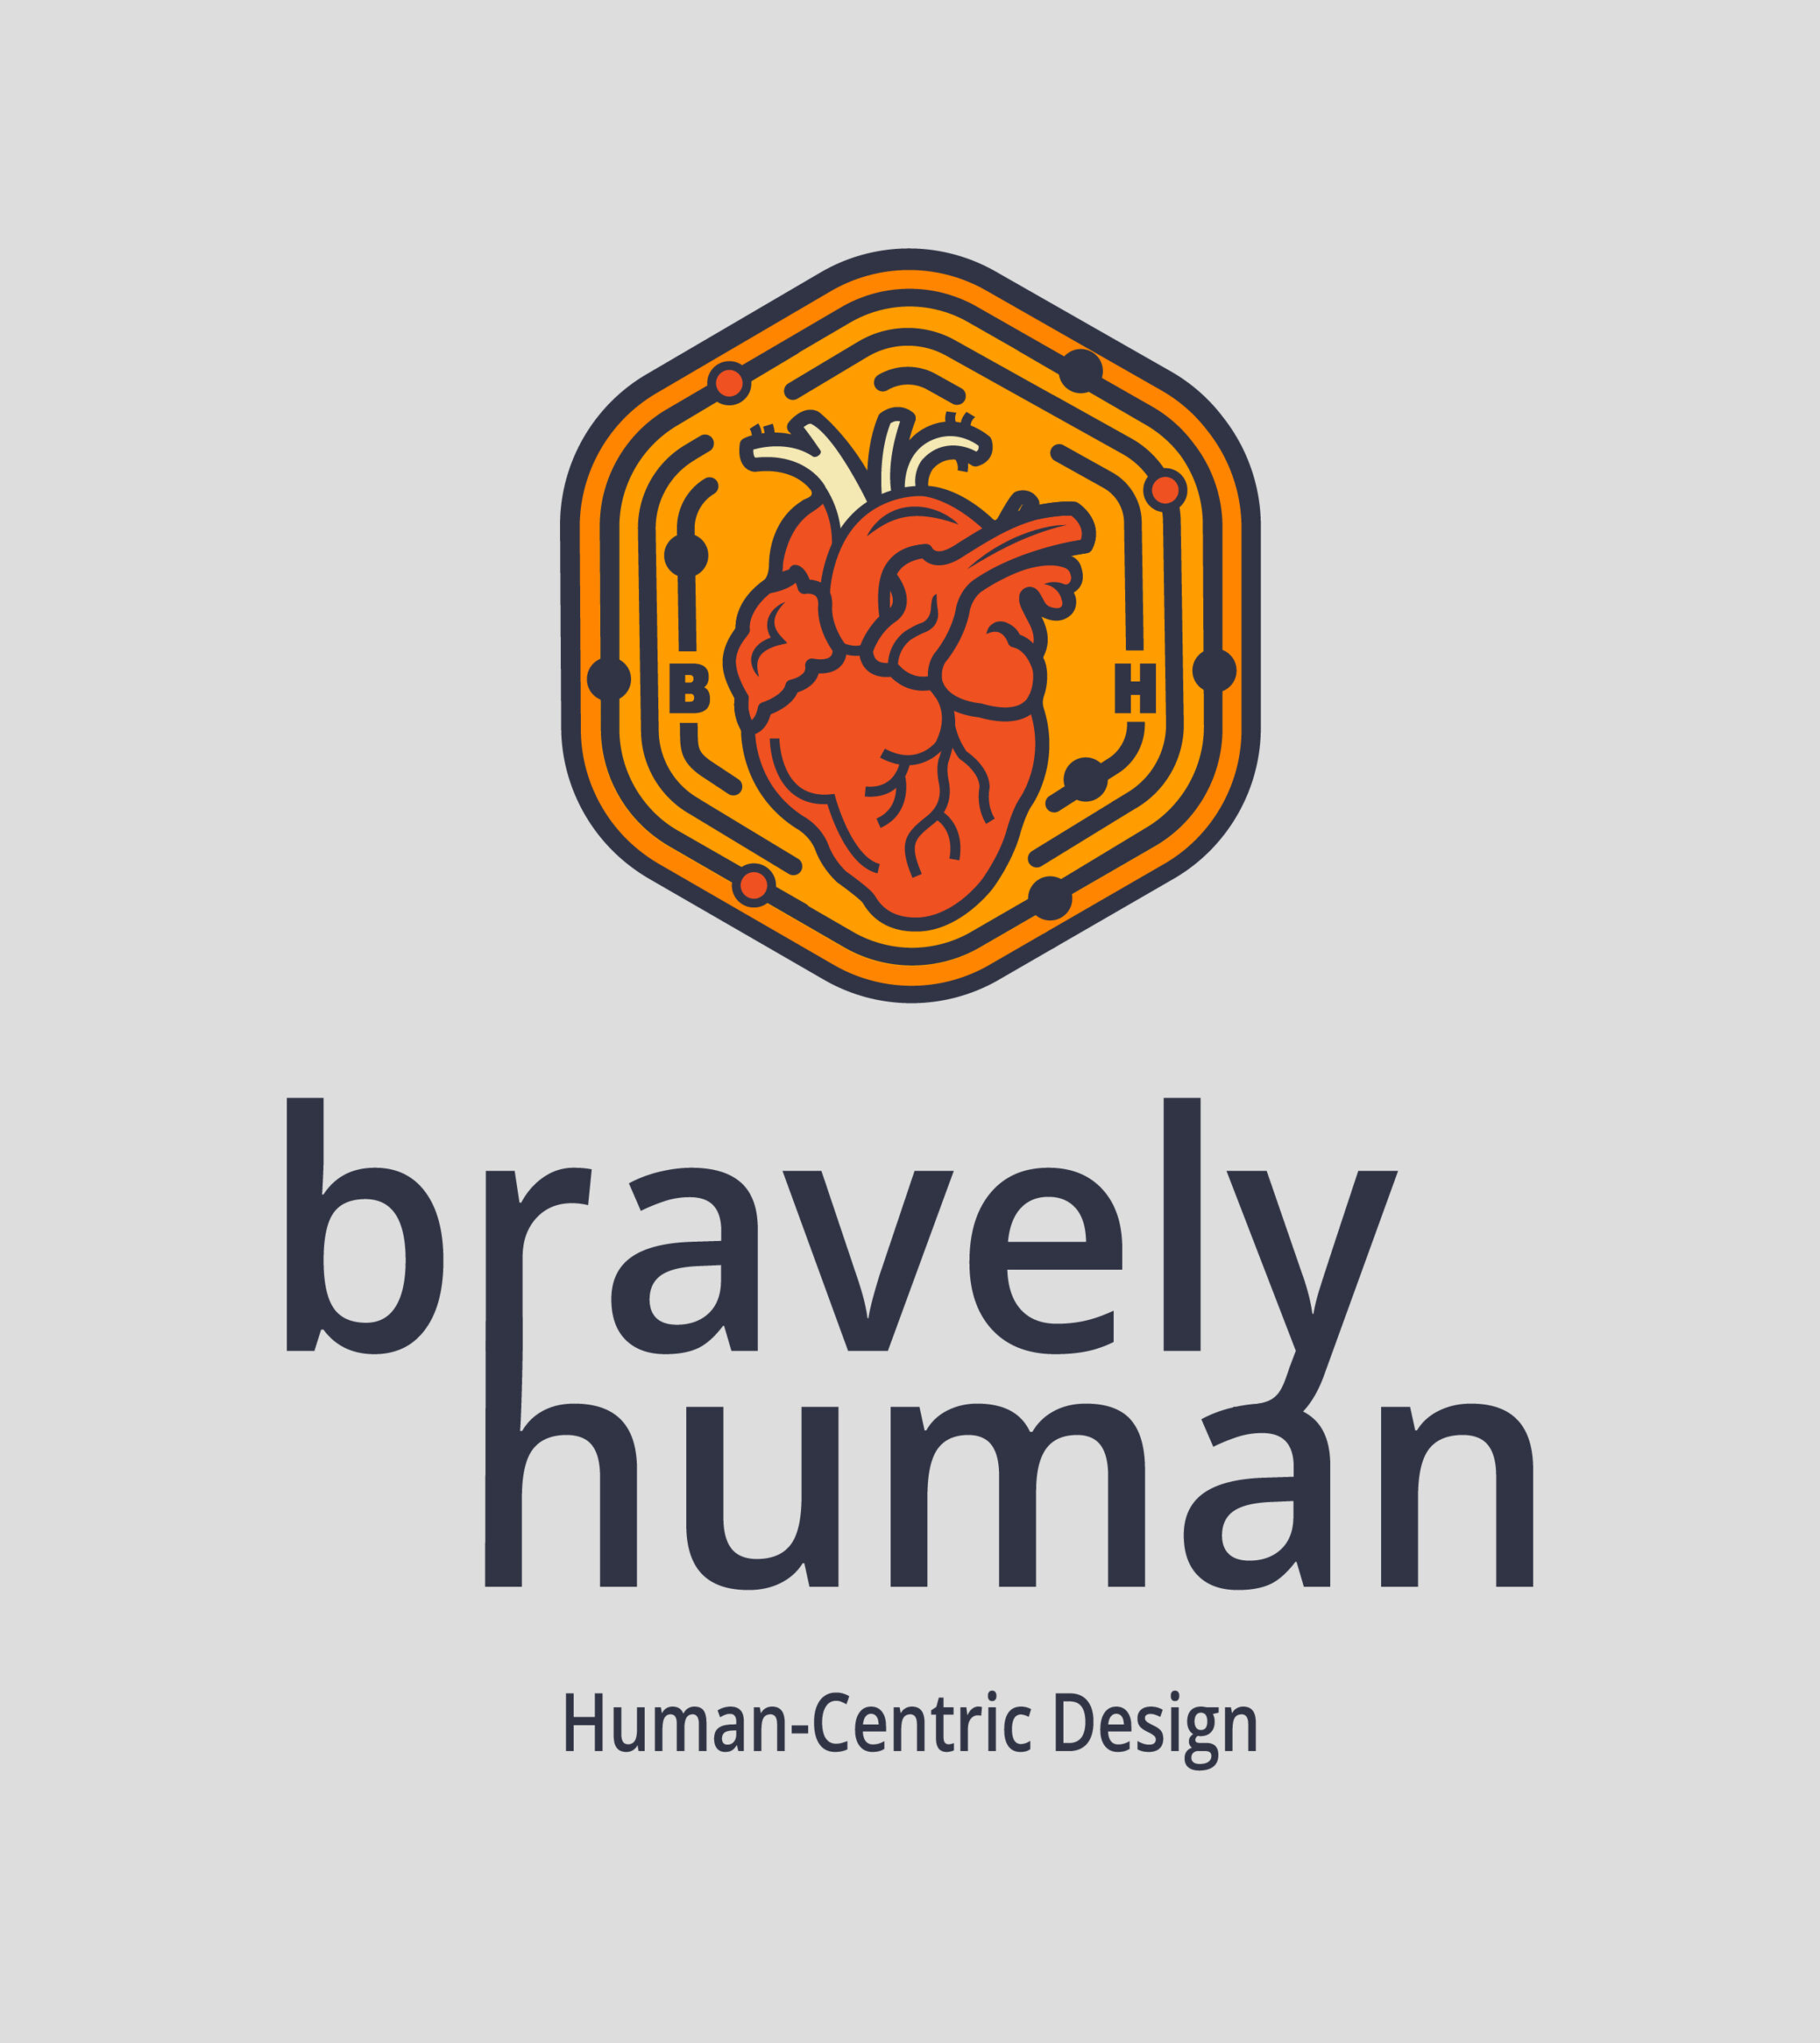 The logo concept for bravely human, a team dedicated to human-centered design, is shown in the following image.